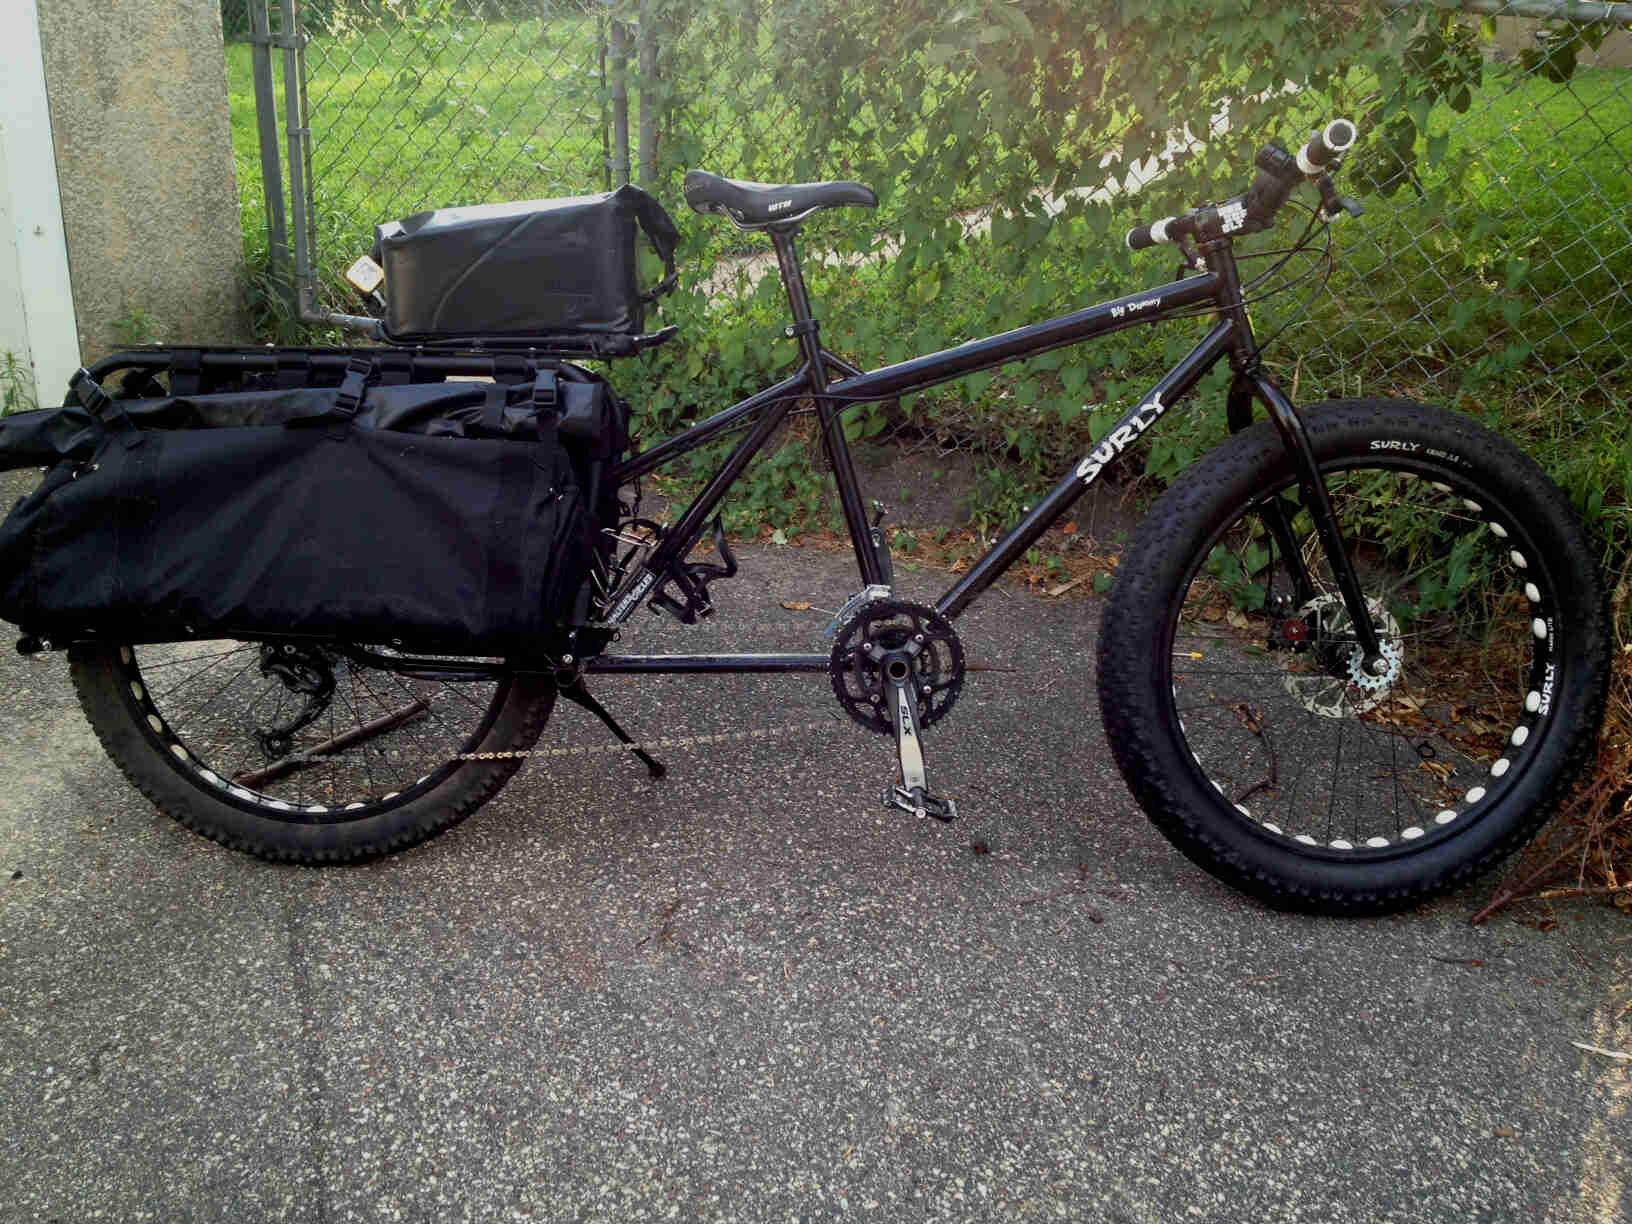 Right side view of a black Surly Big Dummy bike with a fat front wheel, on pavement, with a chain link fence behind